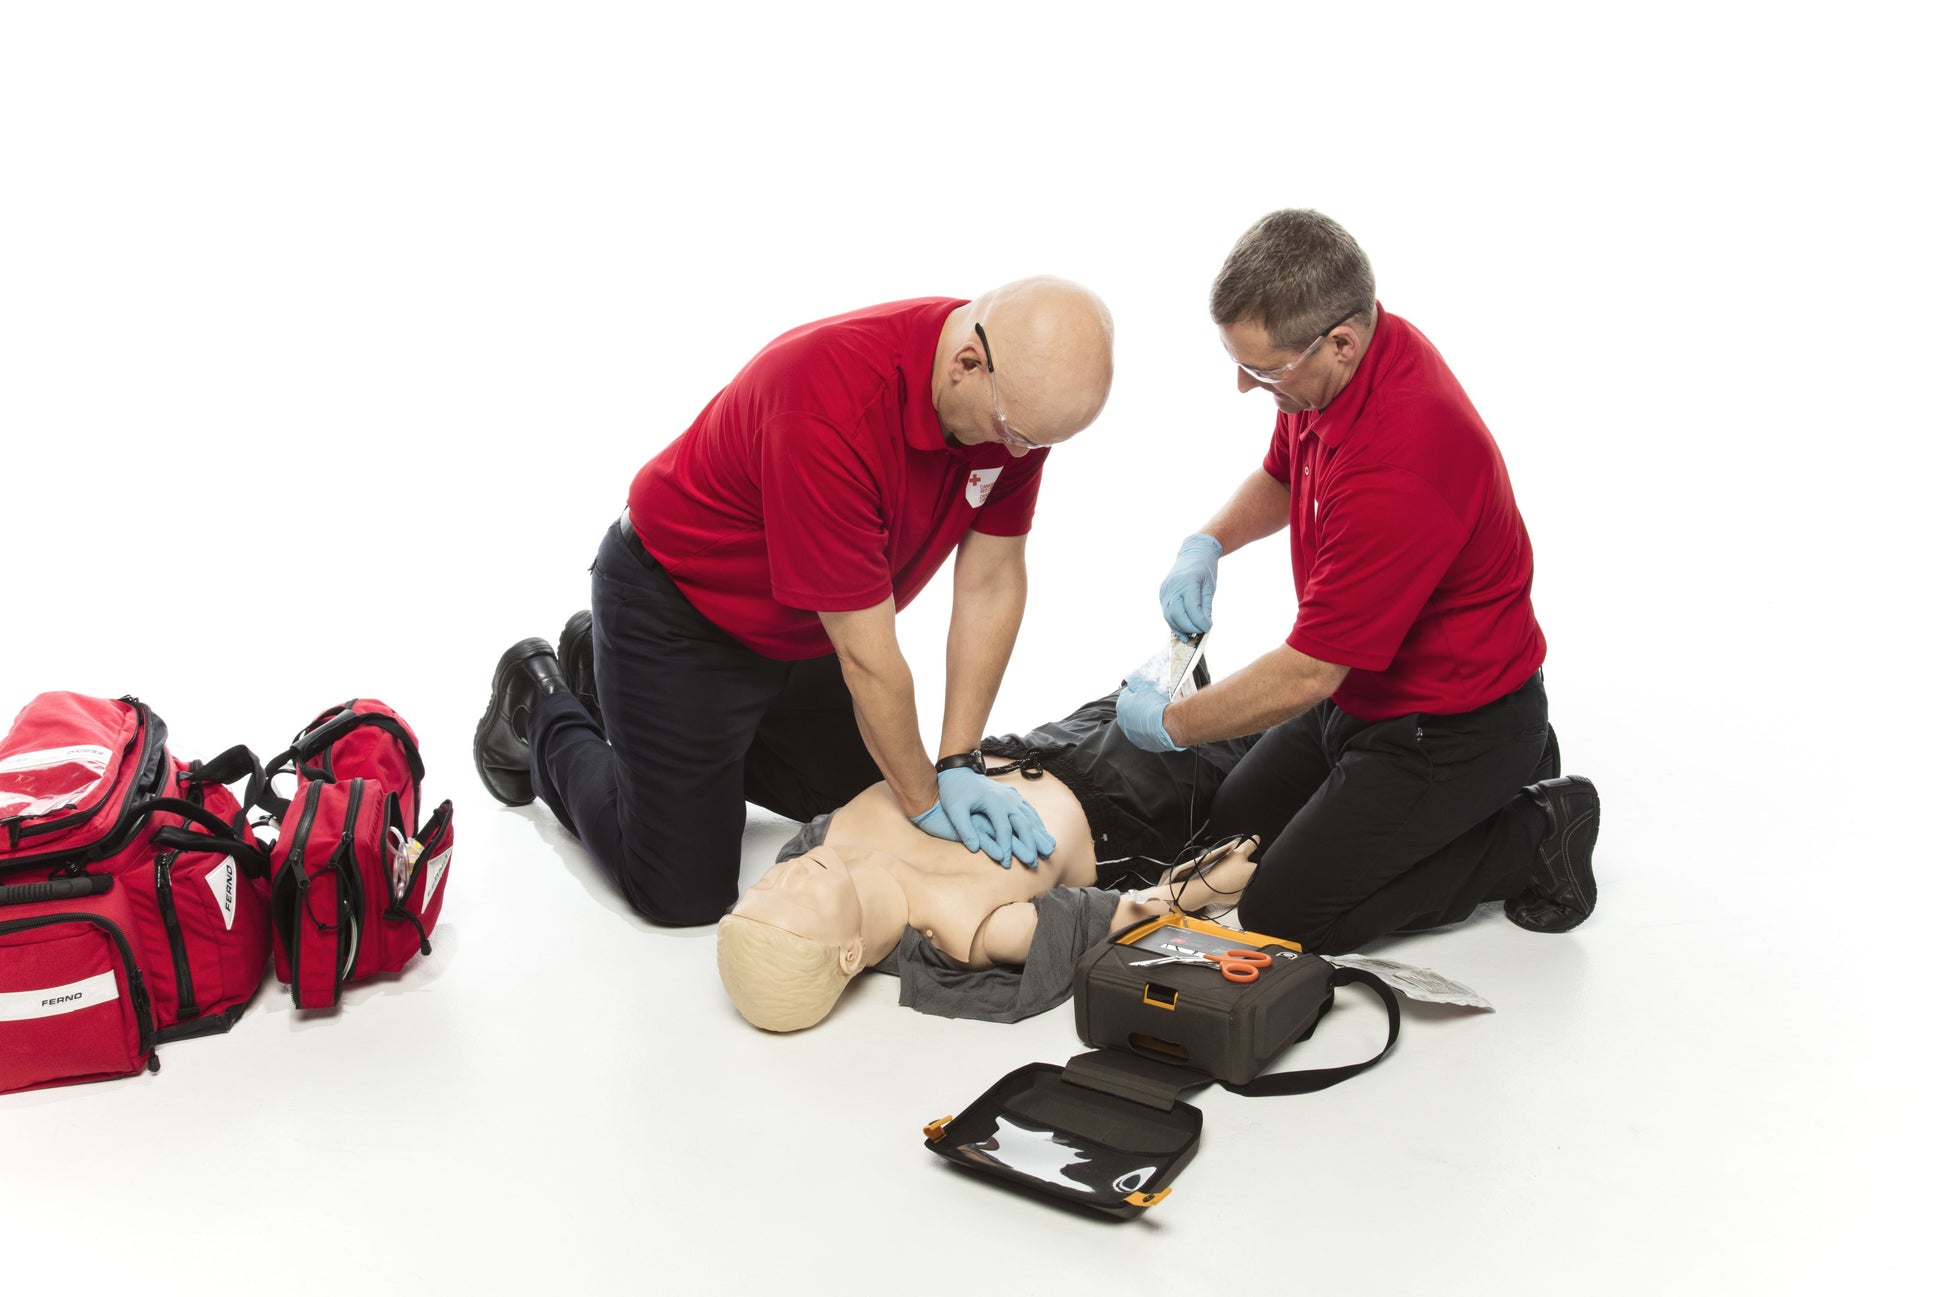 First responders in action, kneeling beside a mannequin and practicing cardiopulmonary resuscitation (CPR). The image shows a team of dedicated individuals delivering chest compressions and rescue breaths as part of their emergency response training. This scene reflects the importance of preparedness in lifesaving techniques.